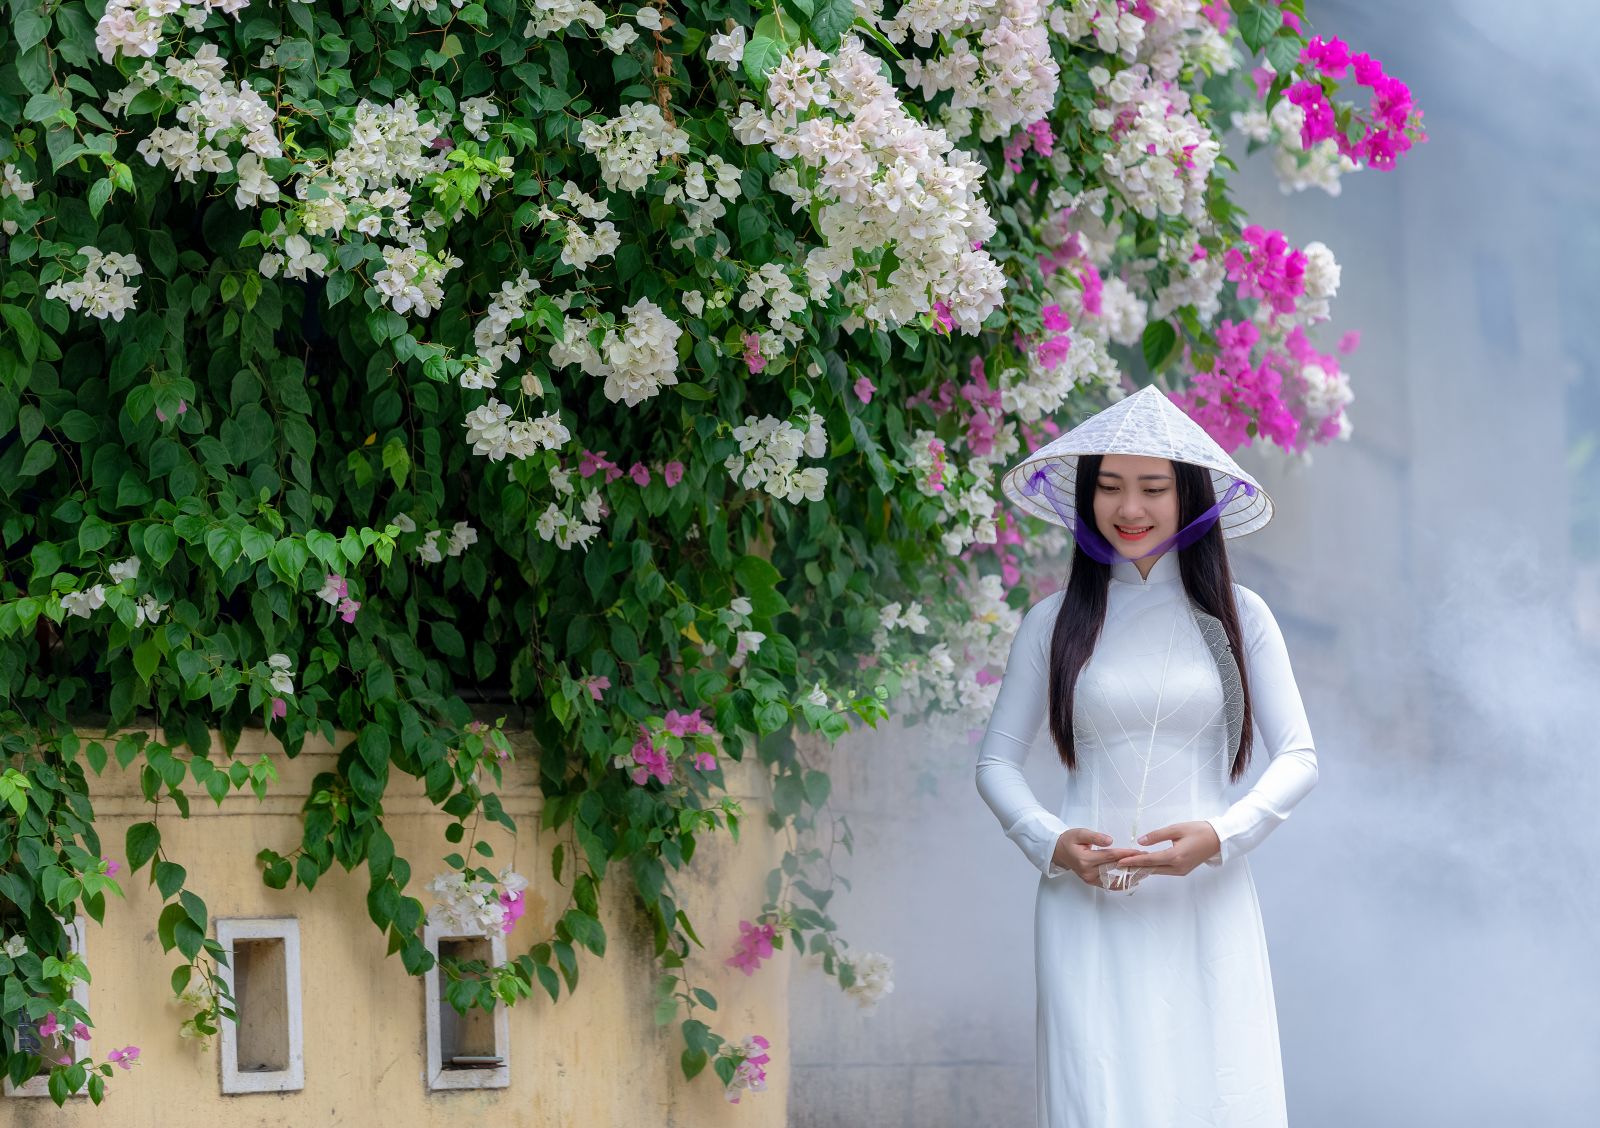 The transparent leaf veins conical hat combined with white ao dai creates the special and unique beauty of Hue.